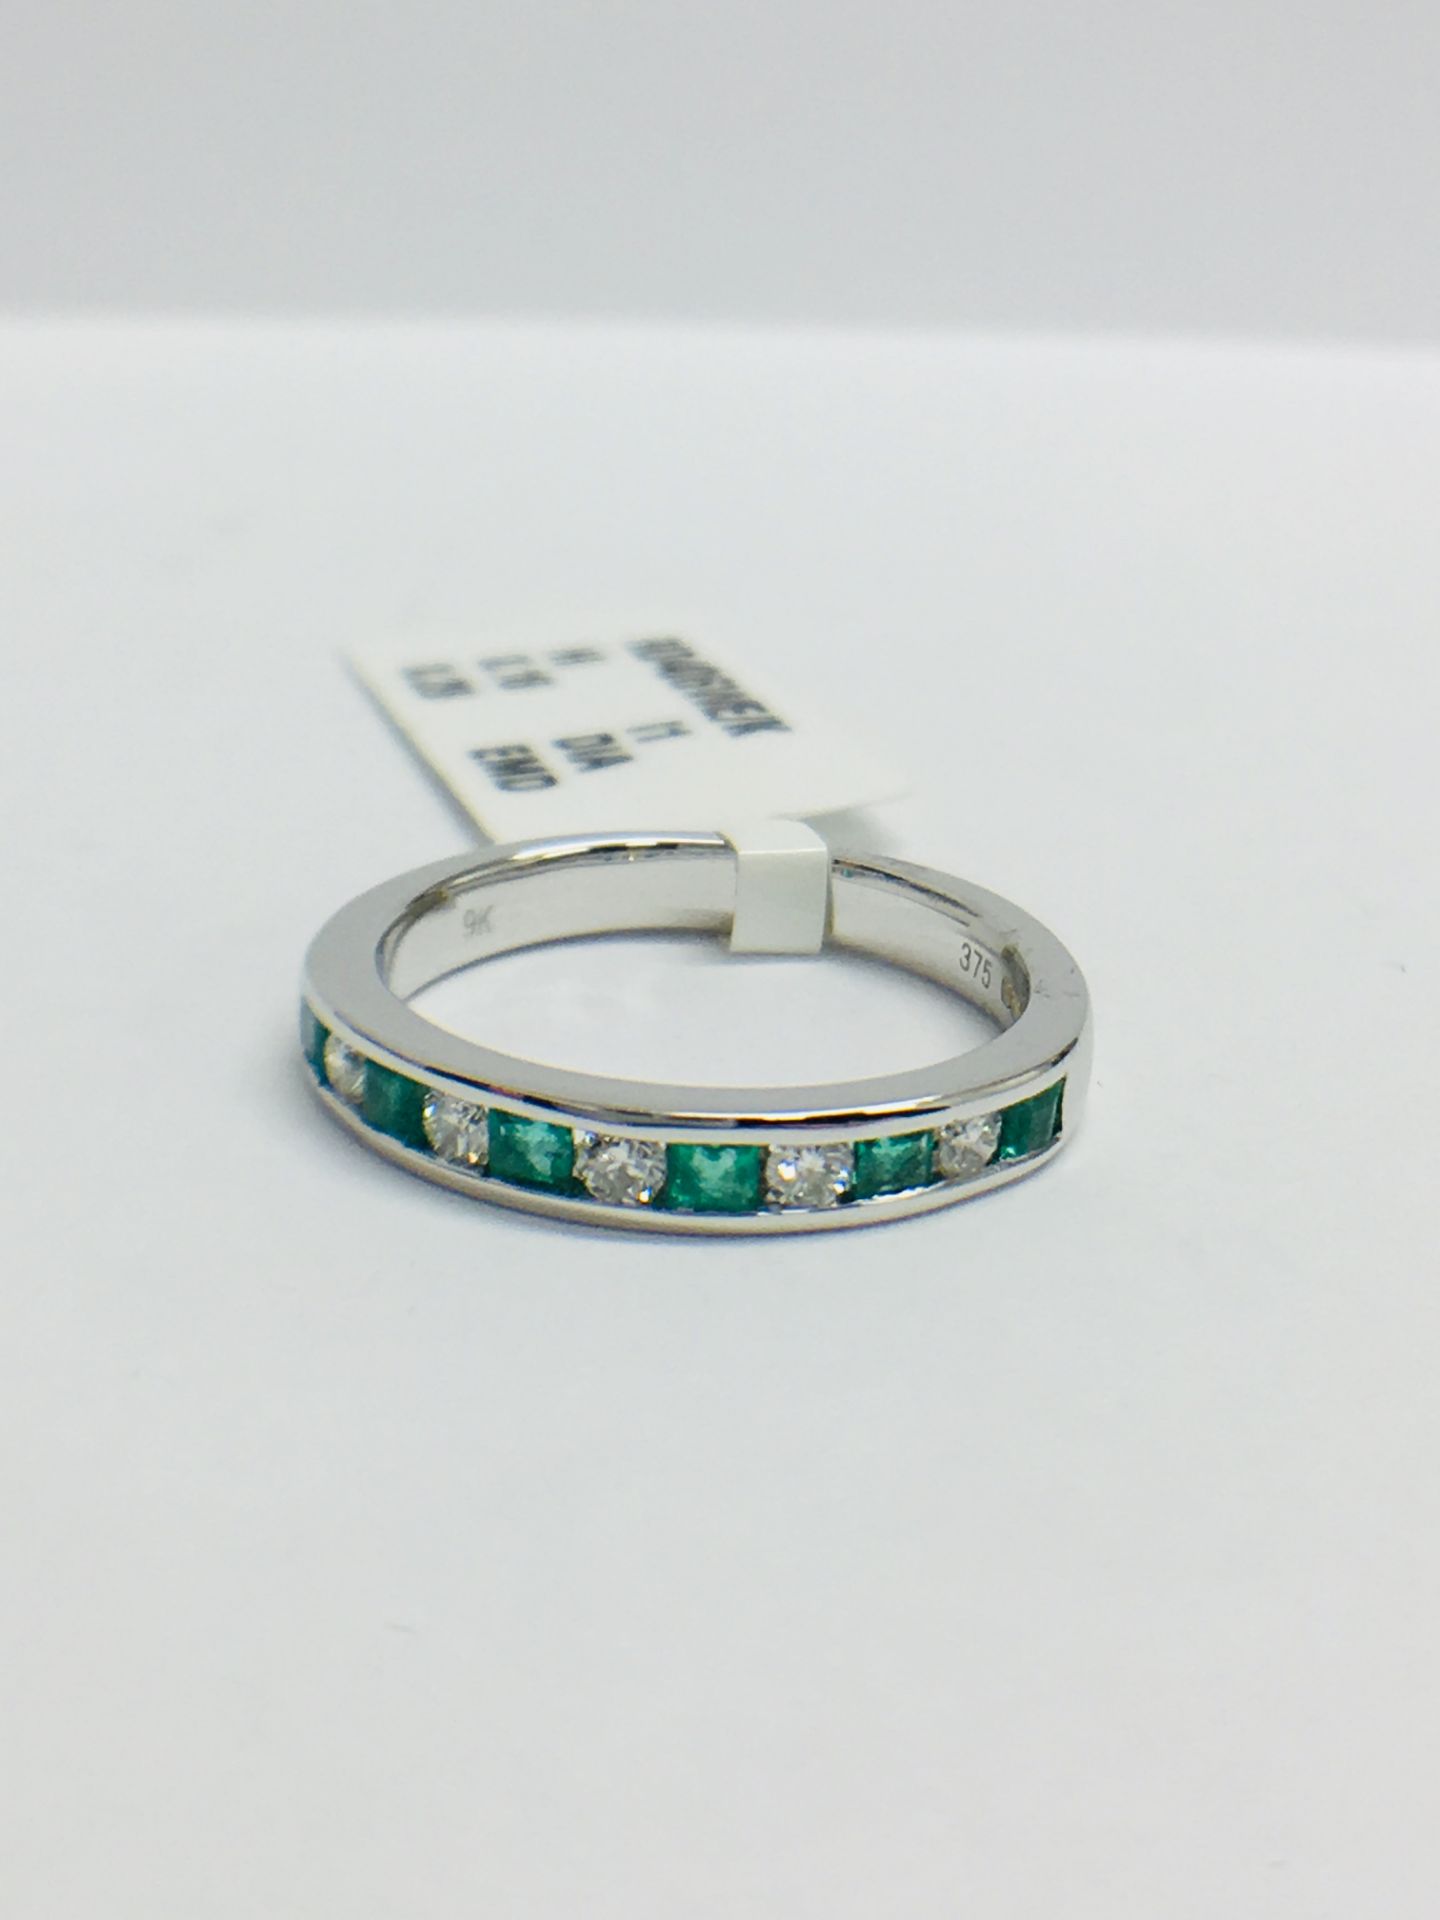 9ct White Gold Emerald Diamond Channel Set Eternity Ring - Image 10 of 12